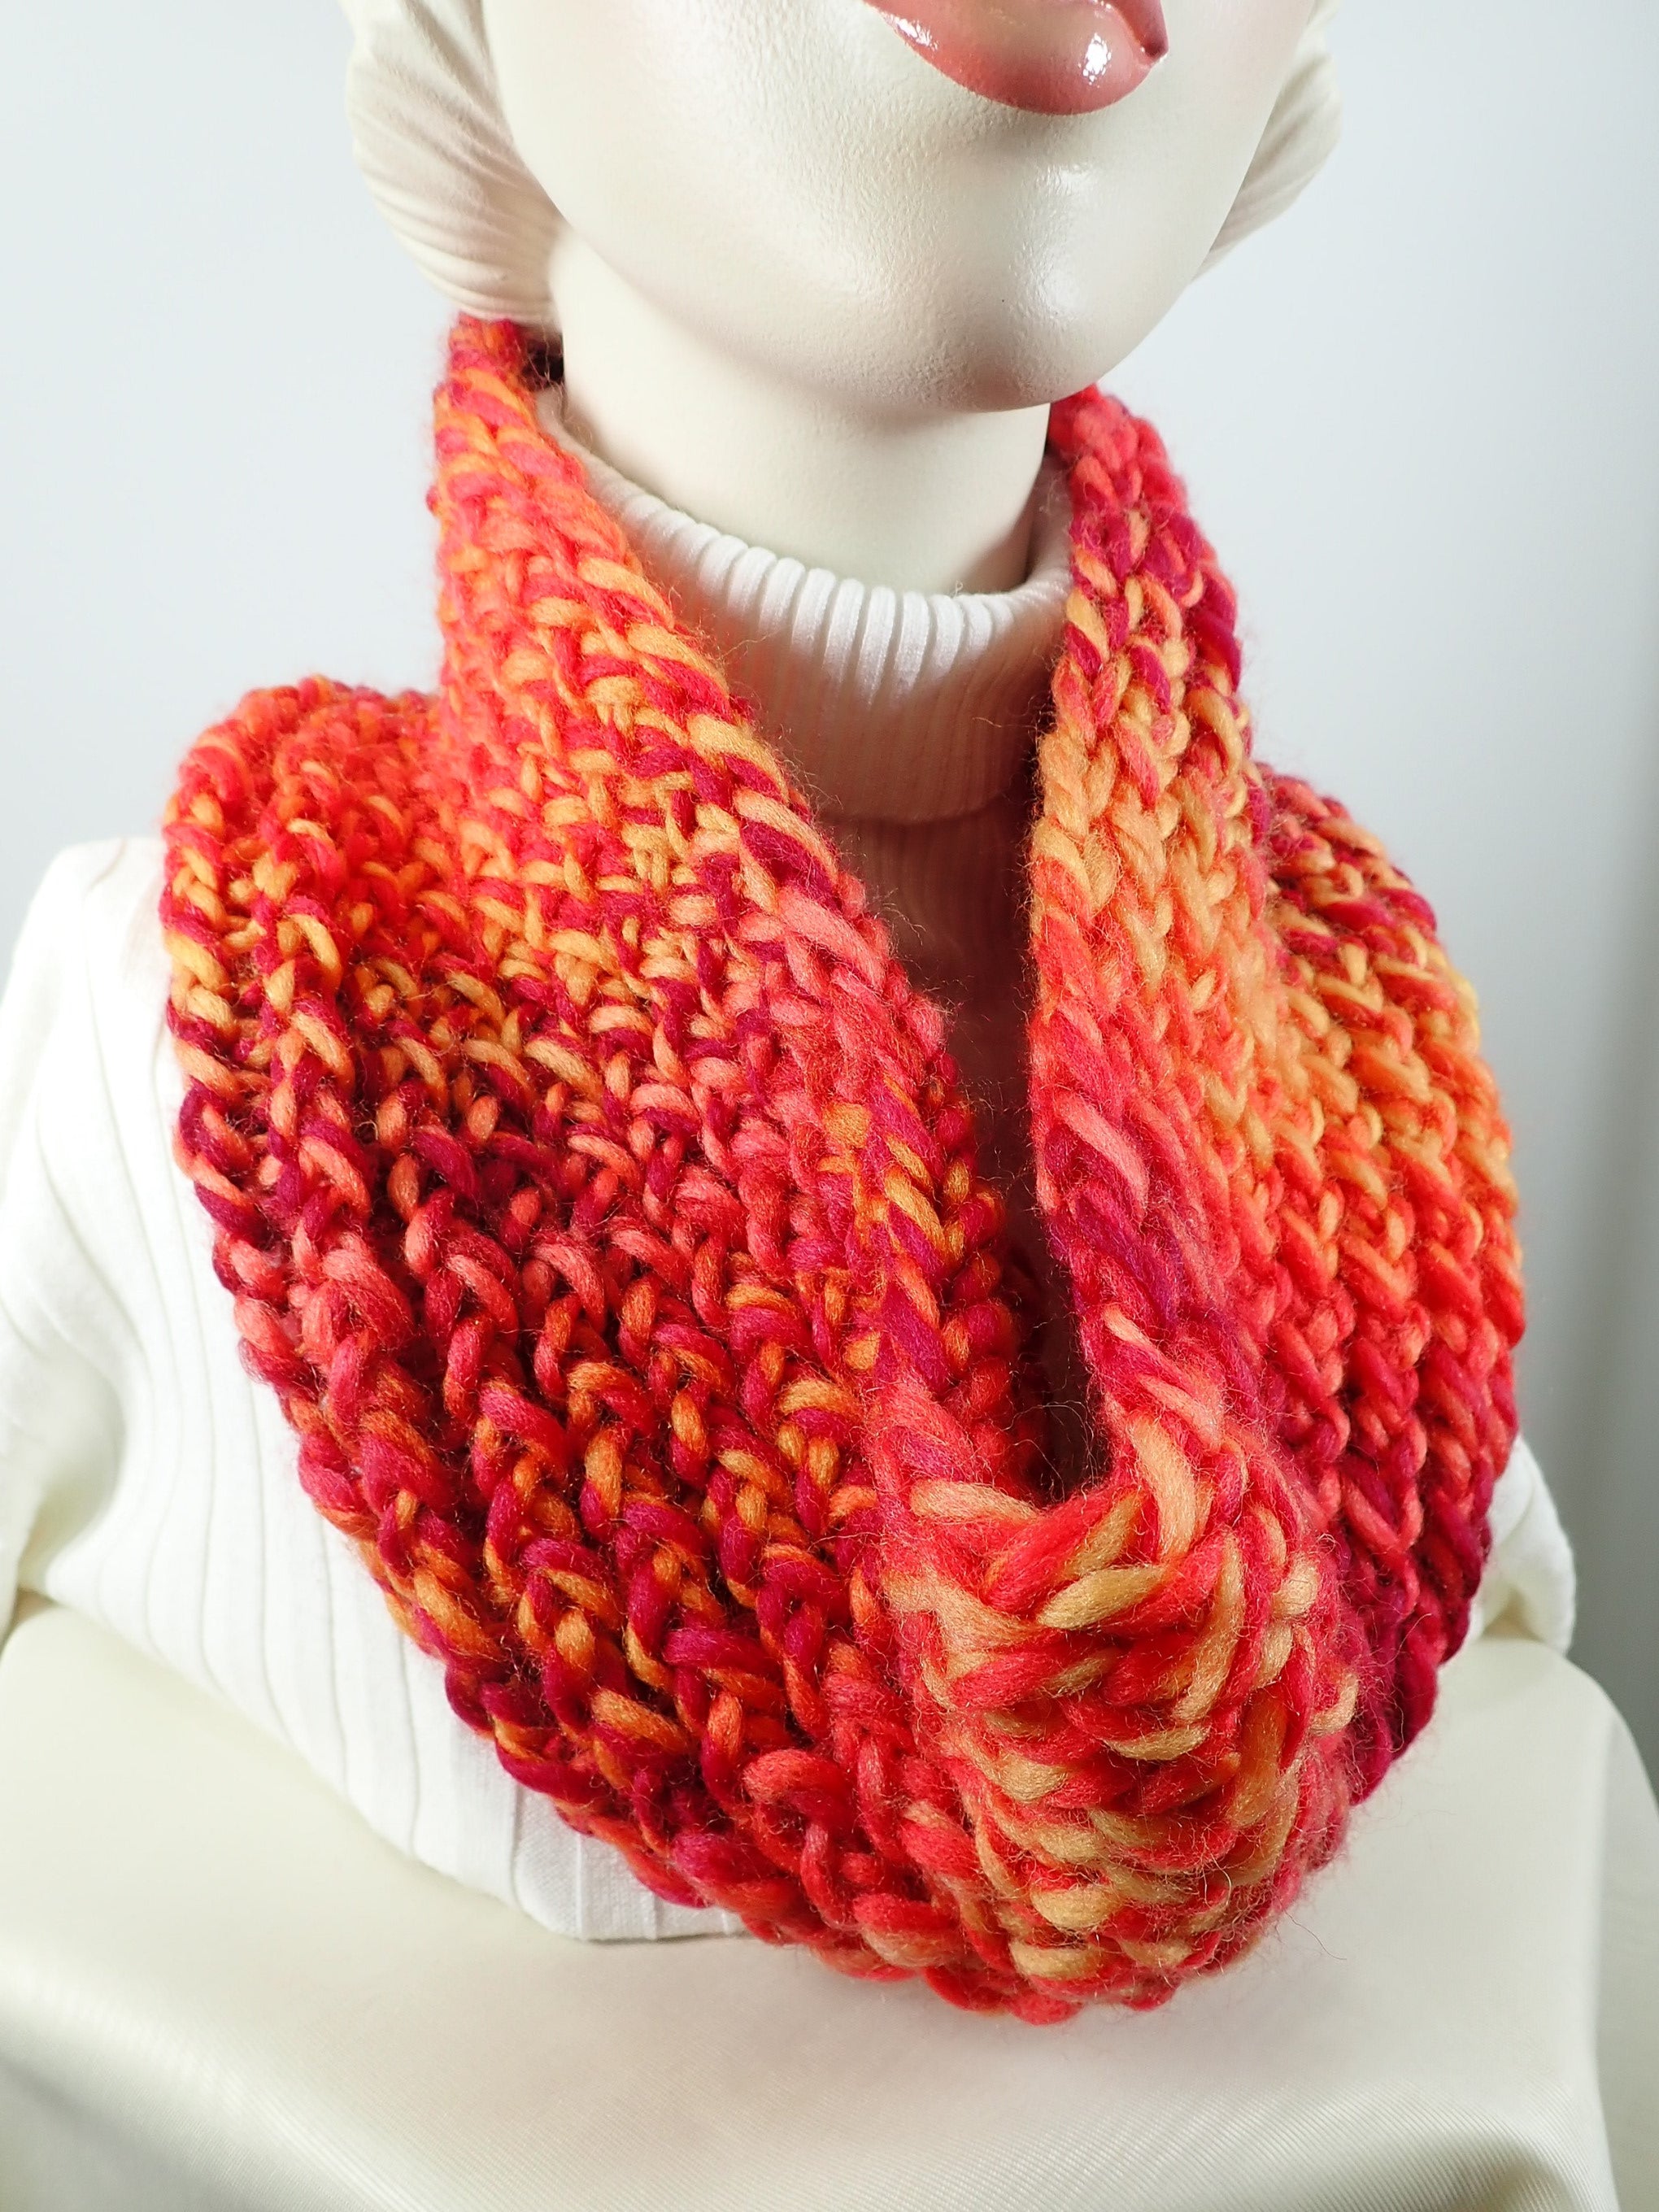 Gifts for her. Hand knitted vividly colored chunky headband and infinity scarf set